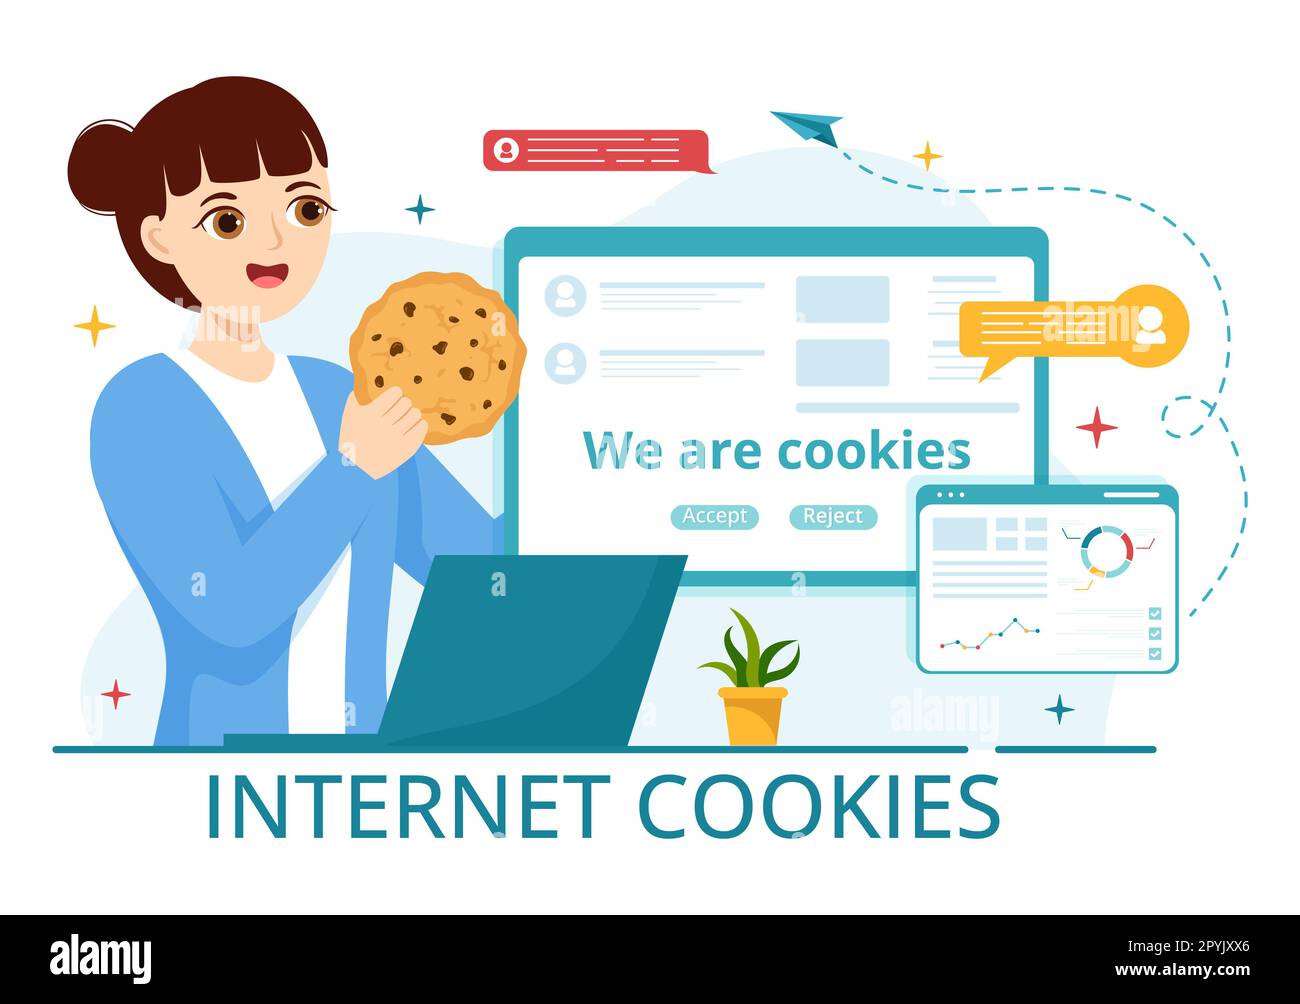 Internet Cookies Technology Illustration with Track Cookie Record of Browsing a Website in Flat Cartoon Hand Drawn Landing Page Templates Stock Photo